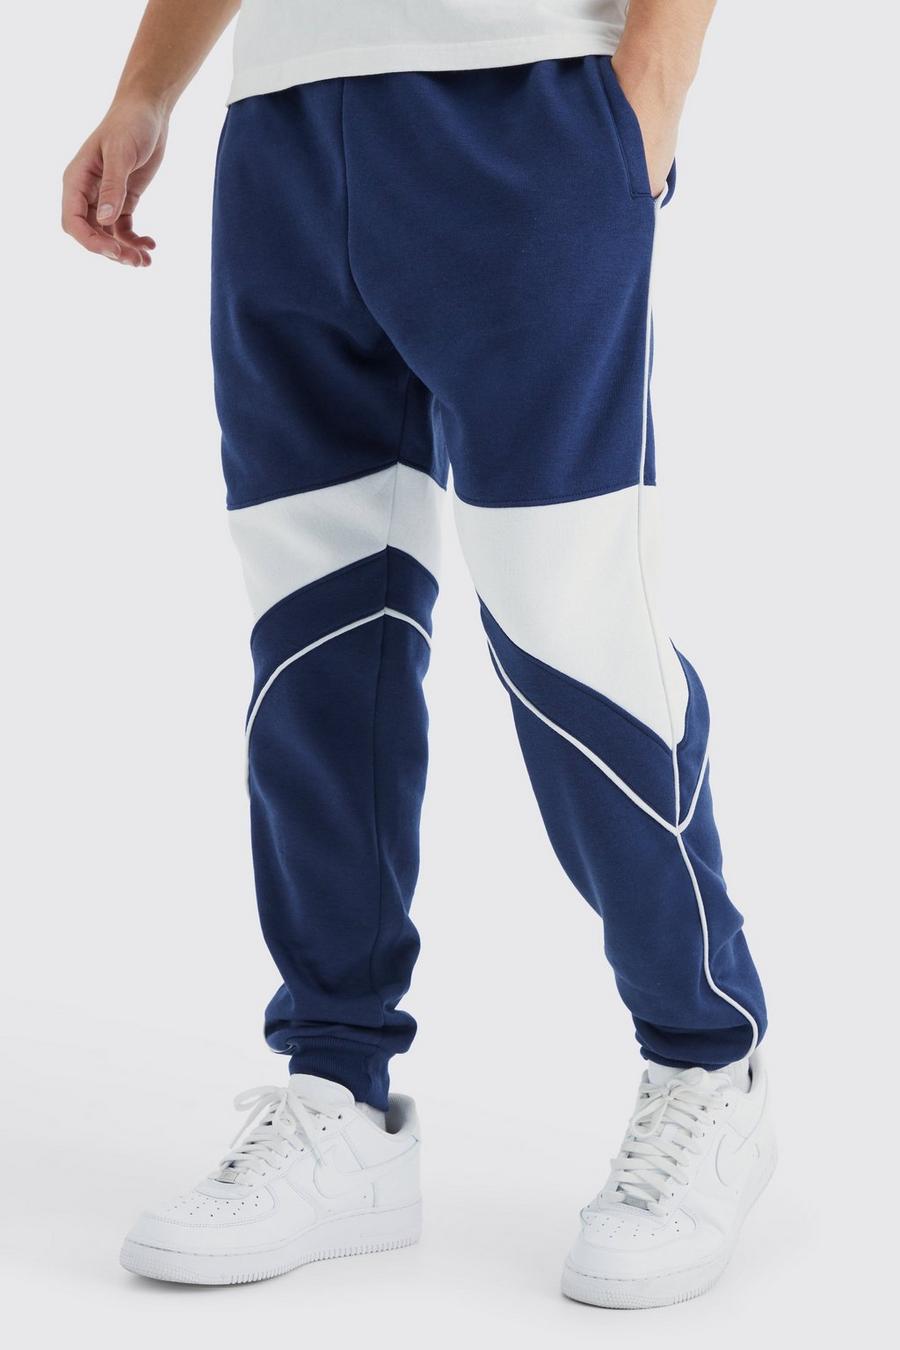 BoohooMAN Slim Tapered Cropped Bonded Scuba Jogger in Blue for Men